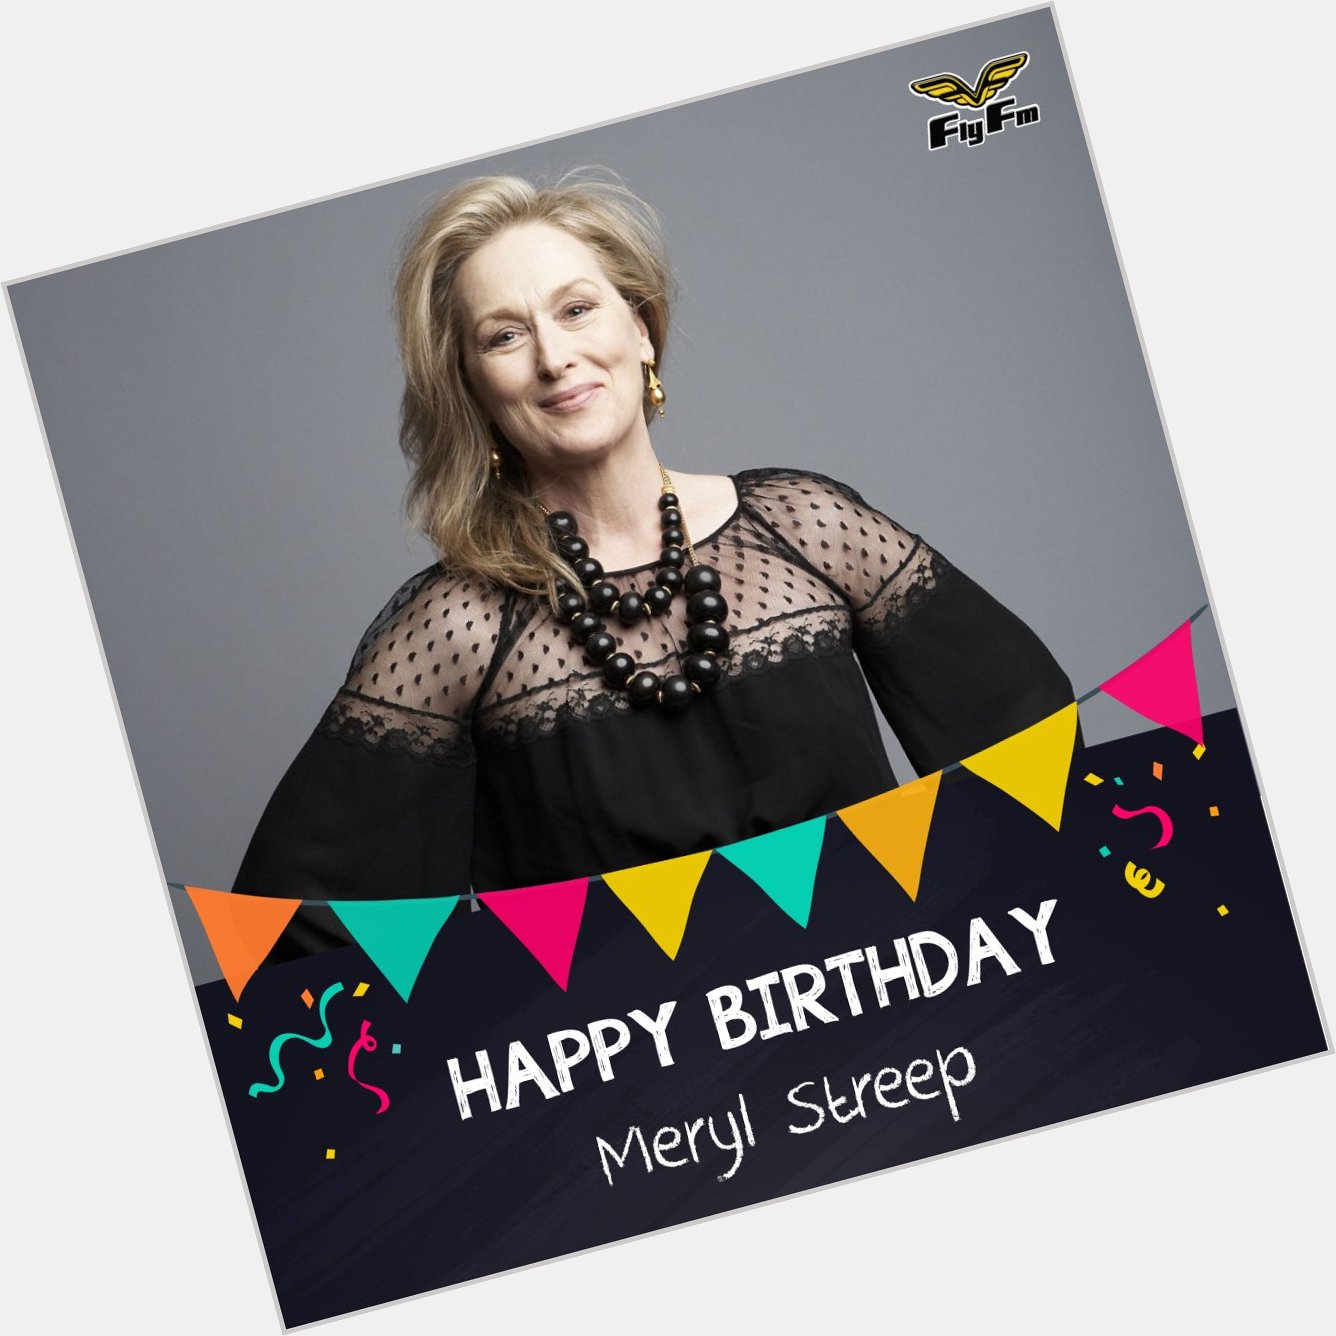 We re celebrating a legend today! HAPPY 68th BIRTHDAY MERYL STREEP! What do you think is her best role ever?? 